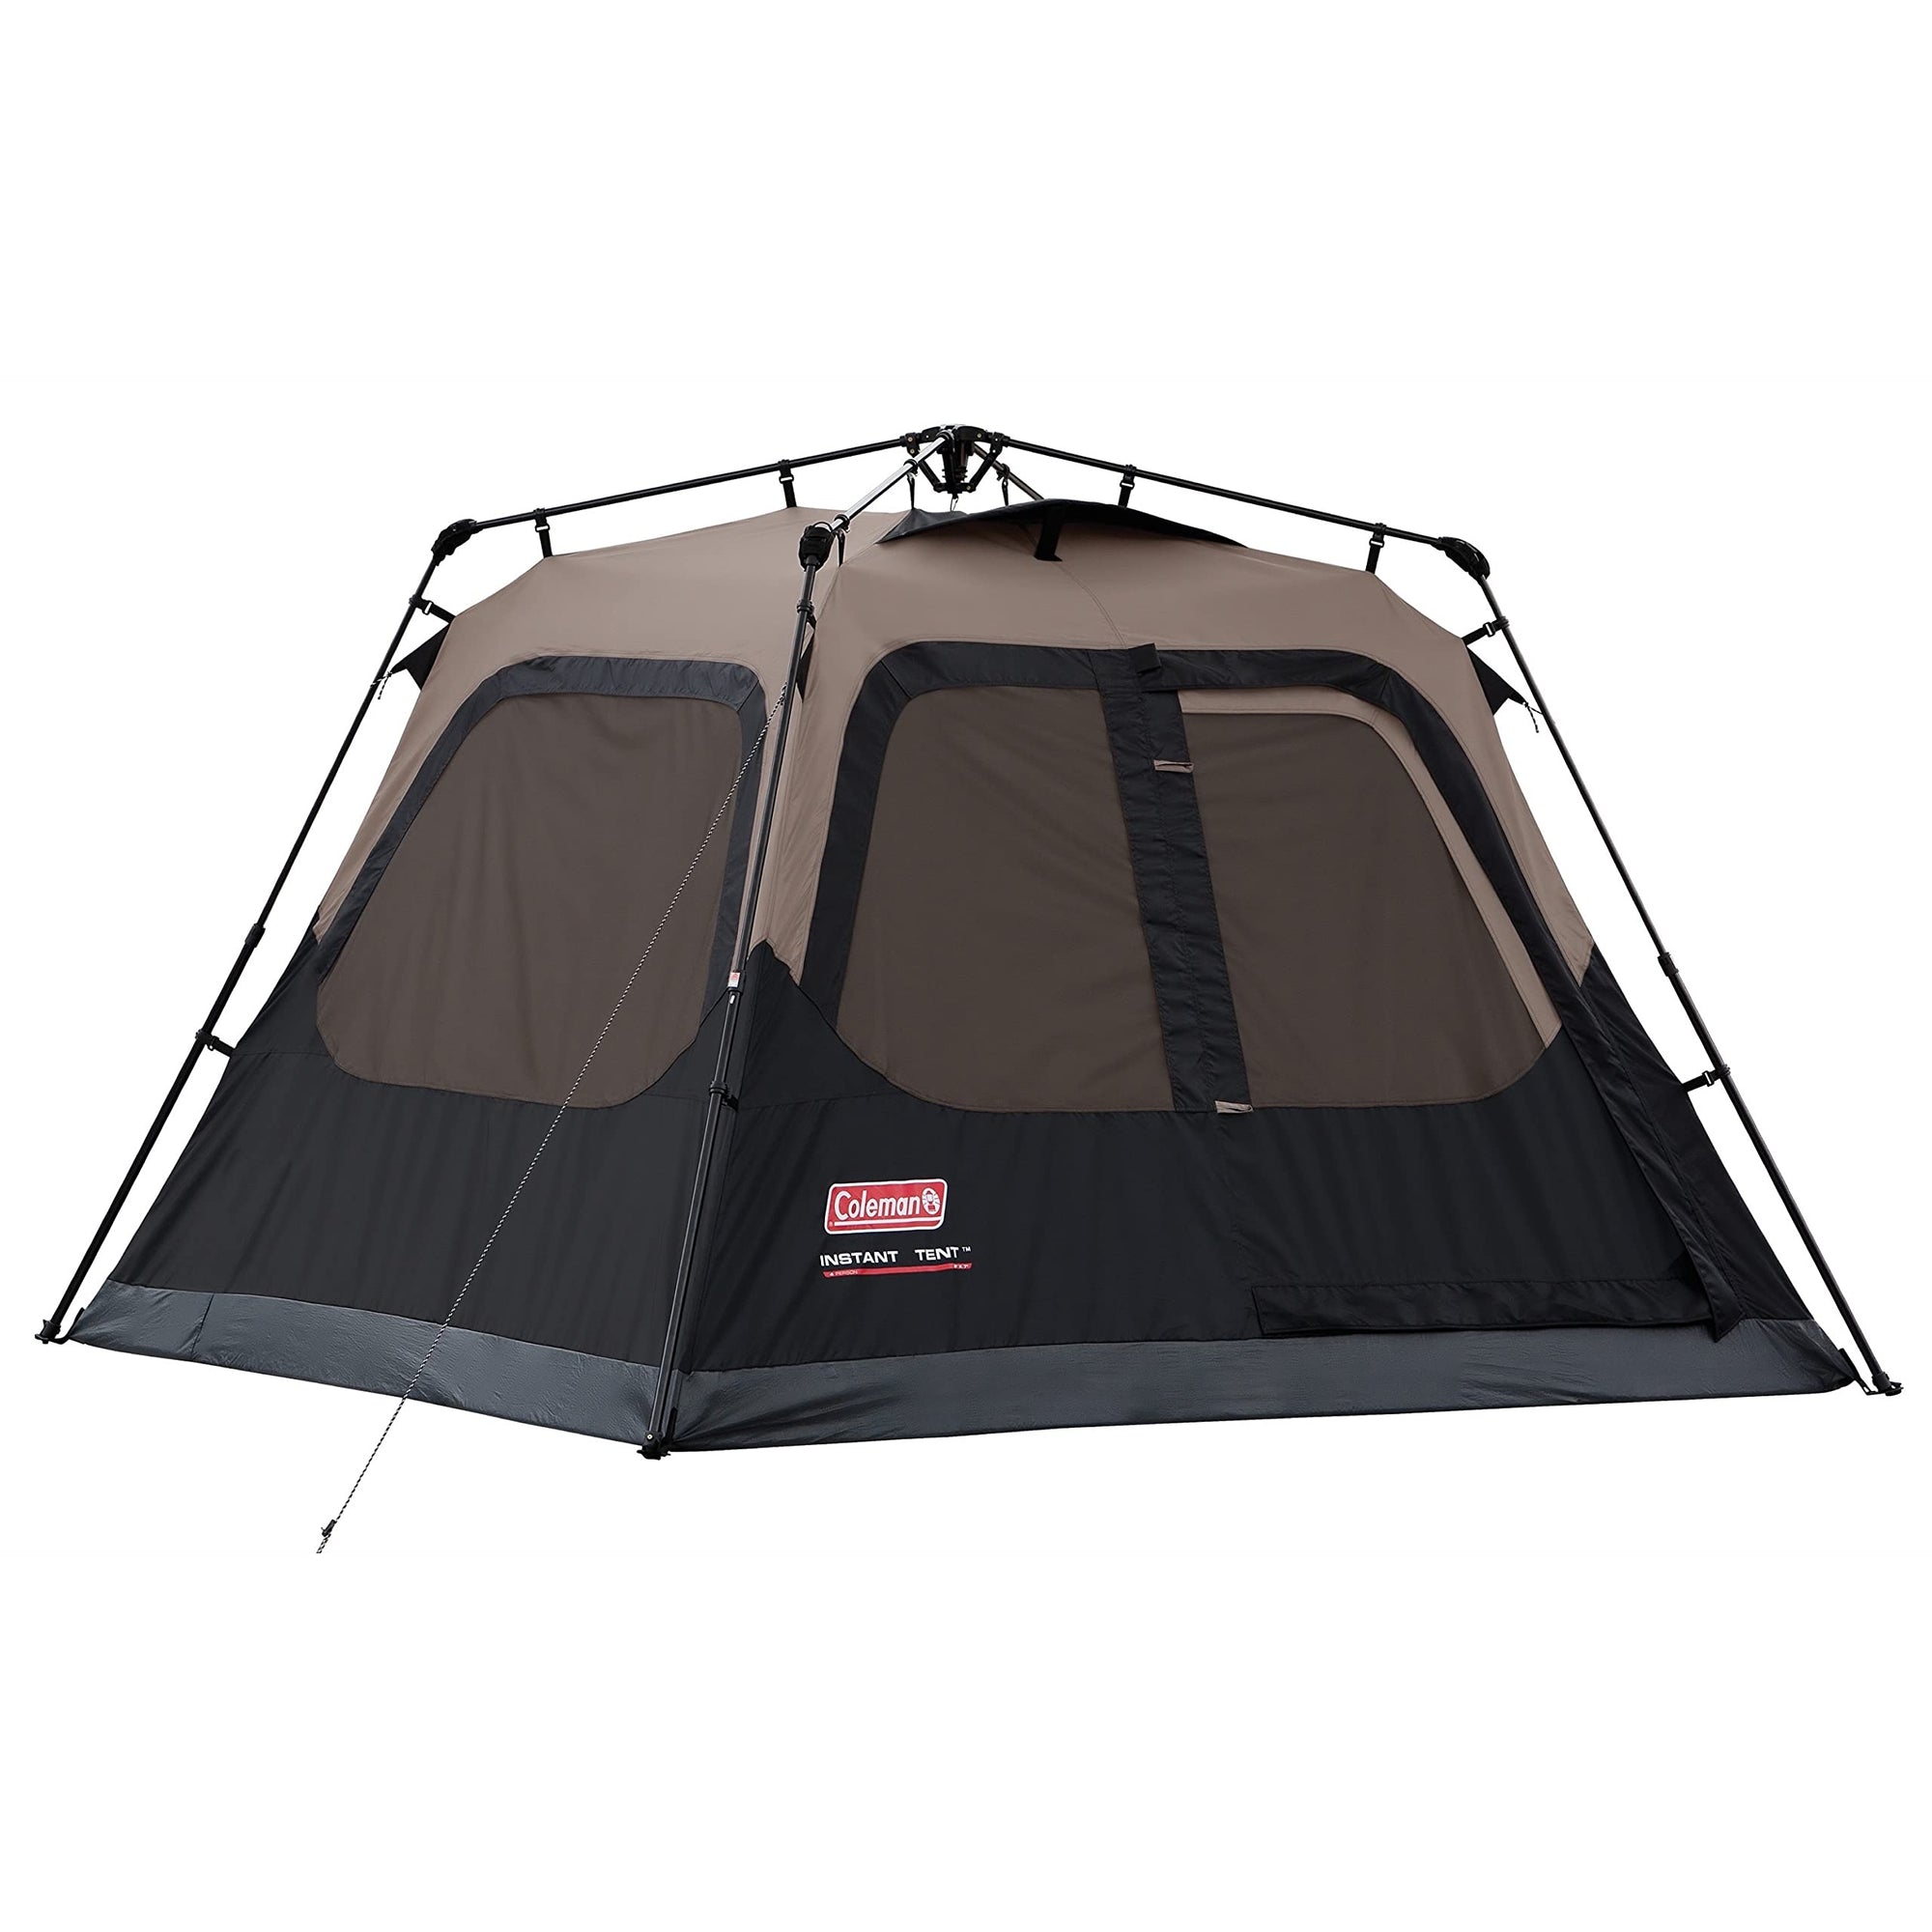 Sports & Outdoors:Outdoor Recreation:Camping & Hiking:Tents & Shelters